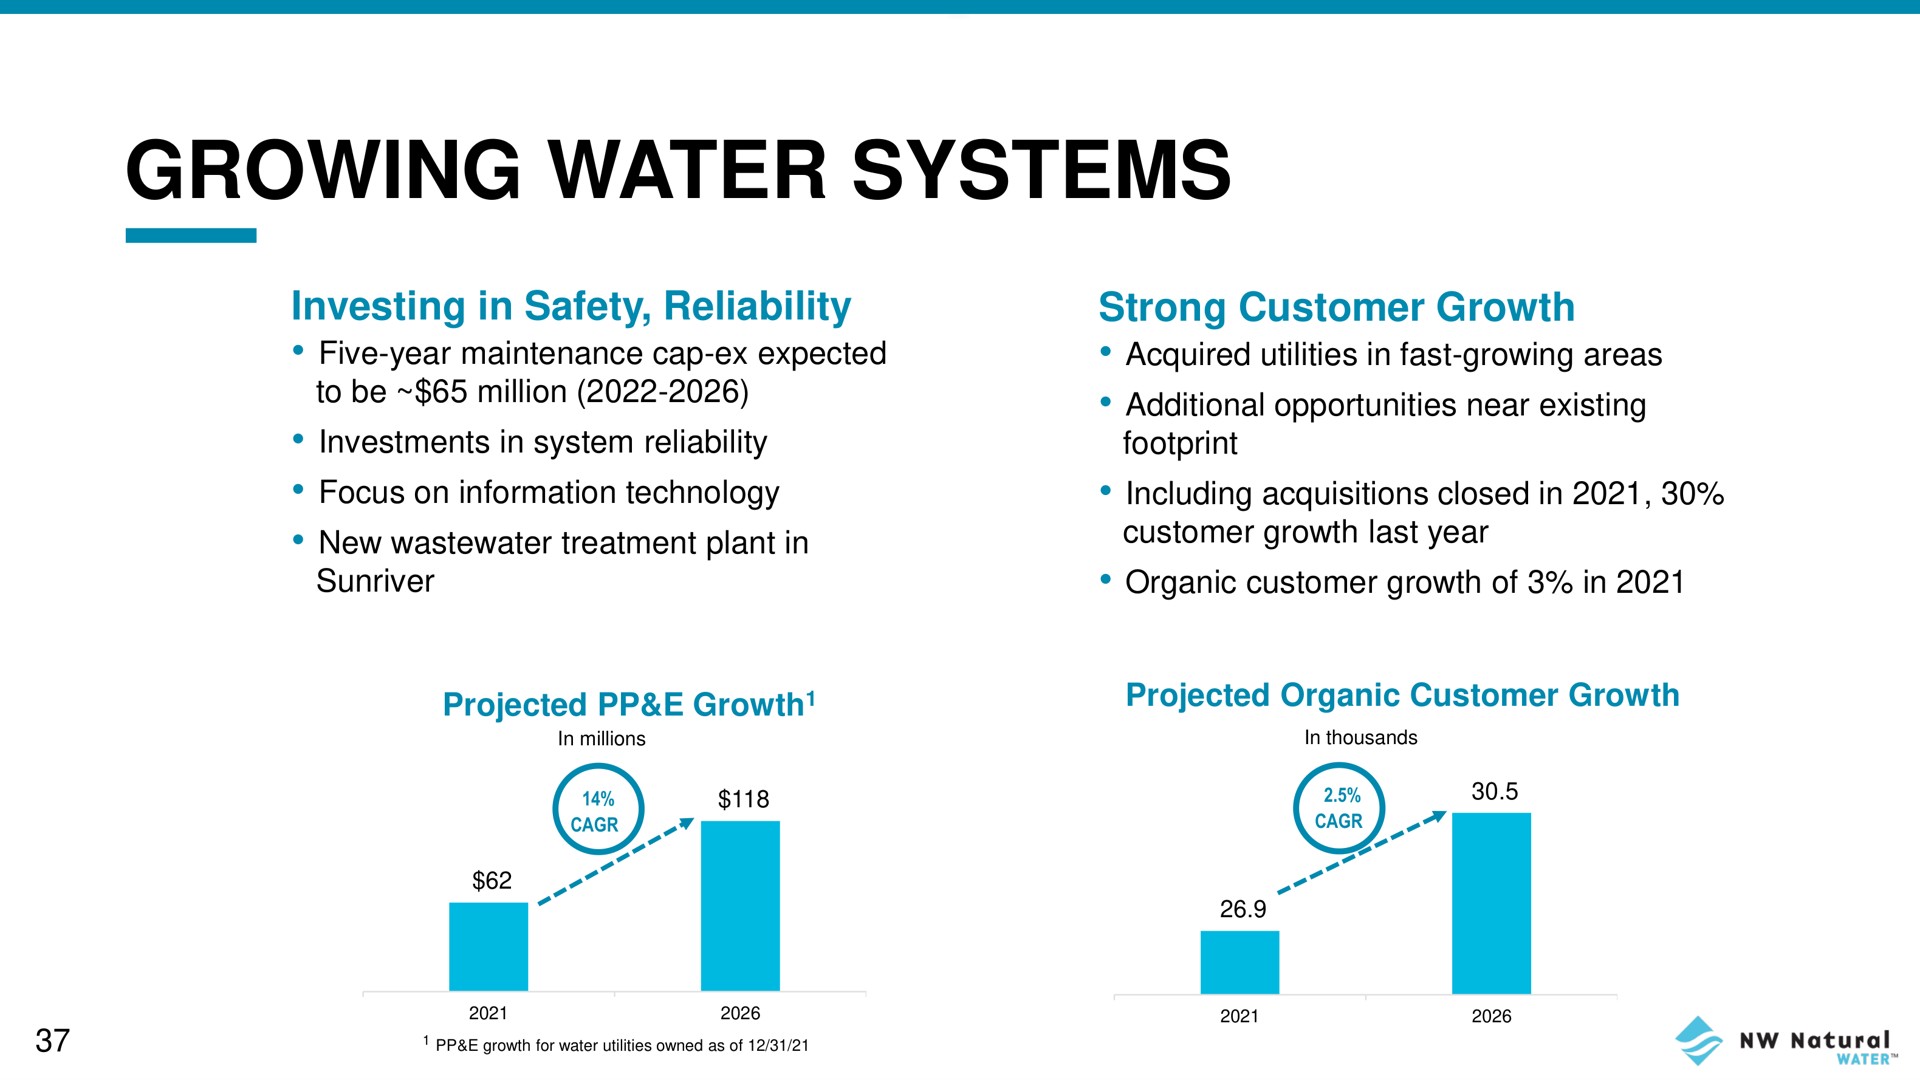 growing water systems | NW Natural Holdings